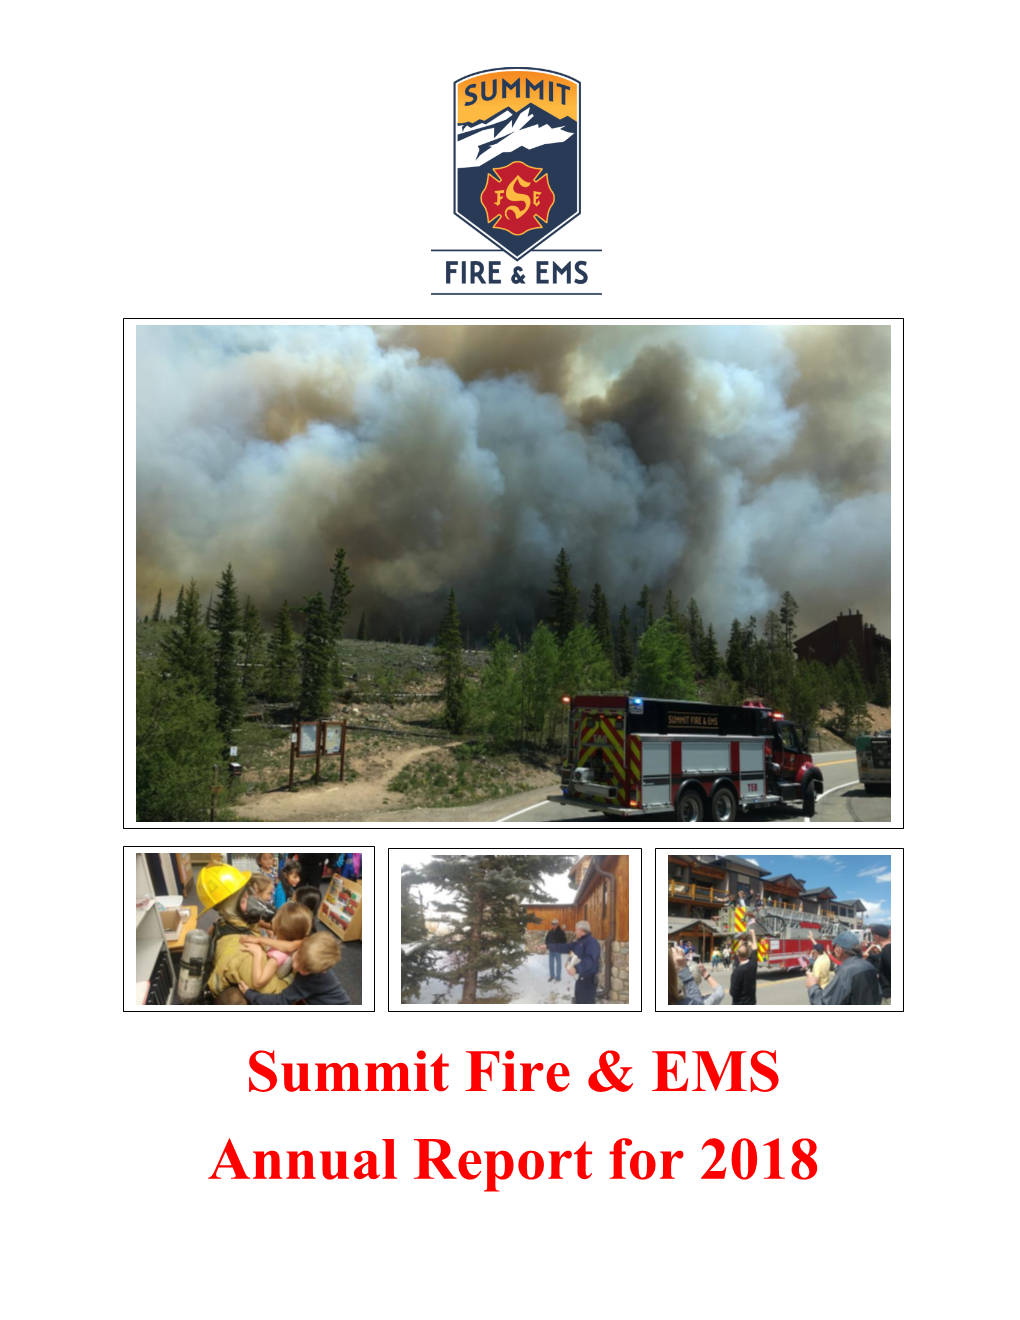 Summit Fire & EMS Annual Report for 2018